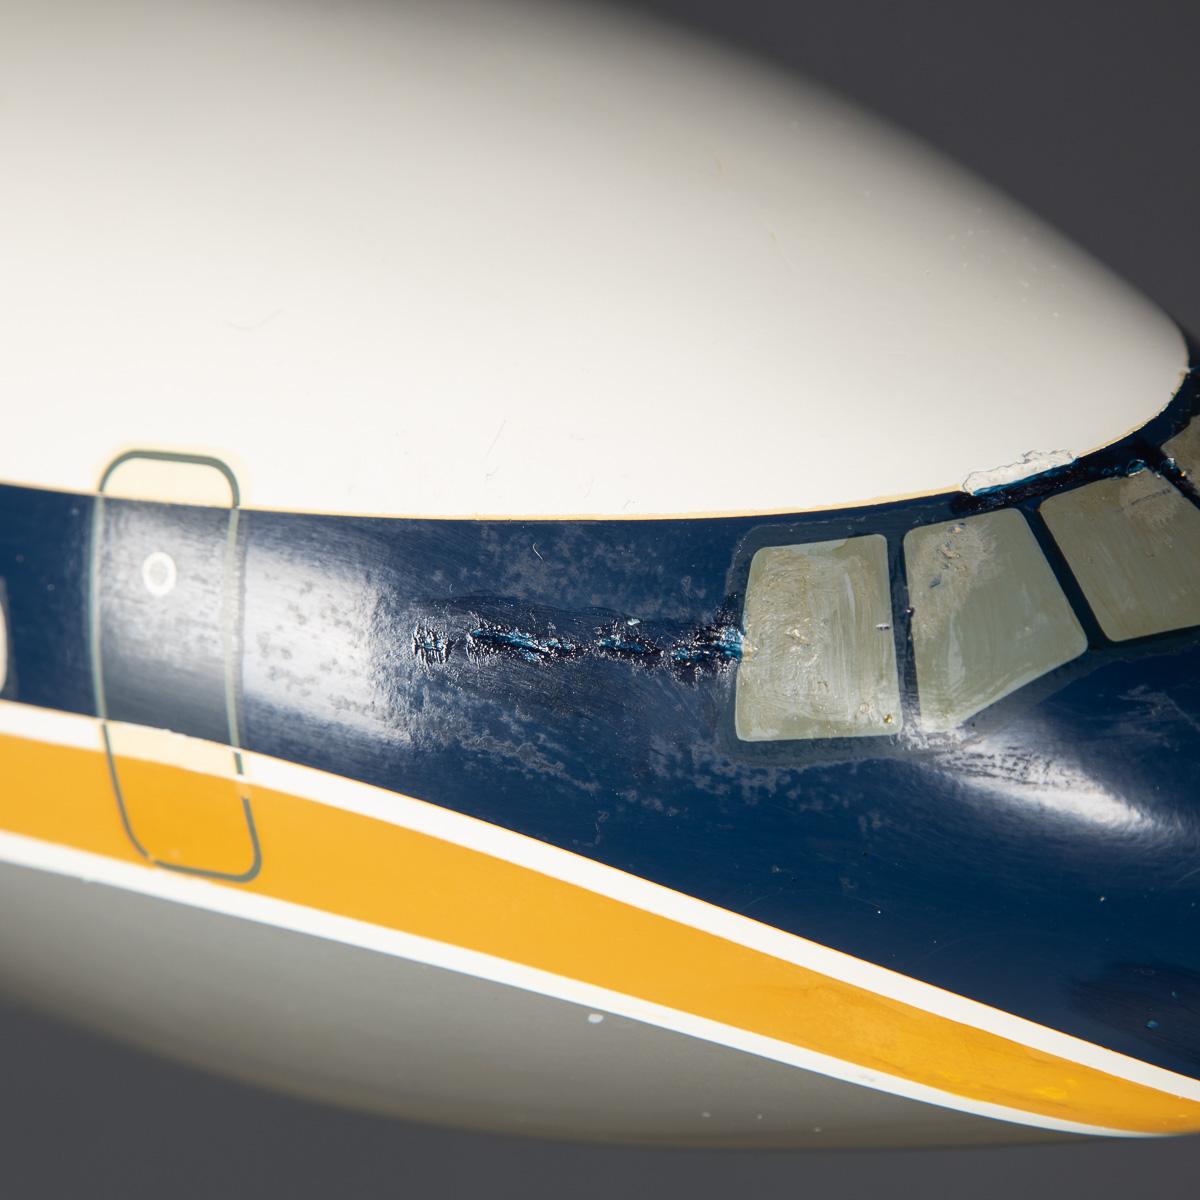 20th Century British Caledonian Dc10 Fibre Glass Airplane Model, c.1970 For Sale 8